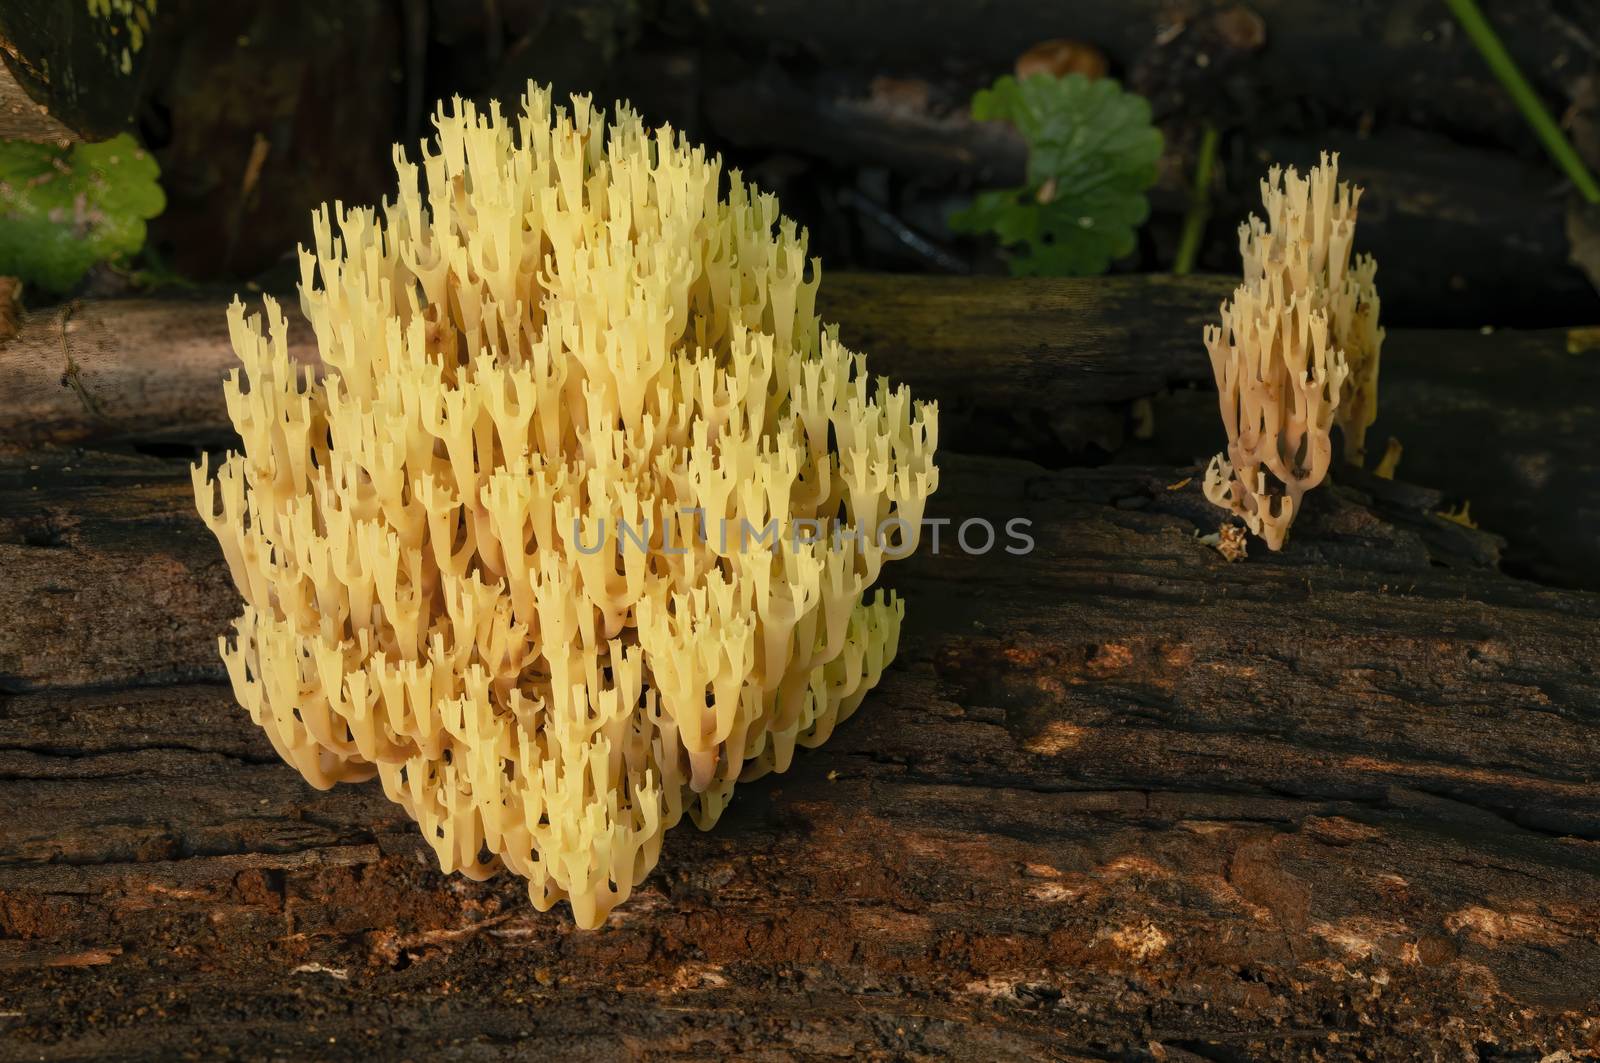 Crown-tipped Coral Fungus on Log by CharlieFloyd